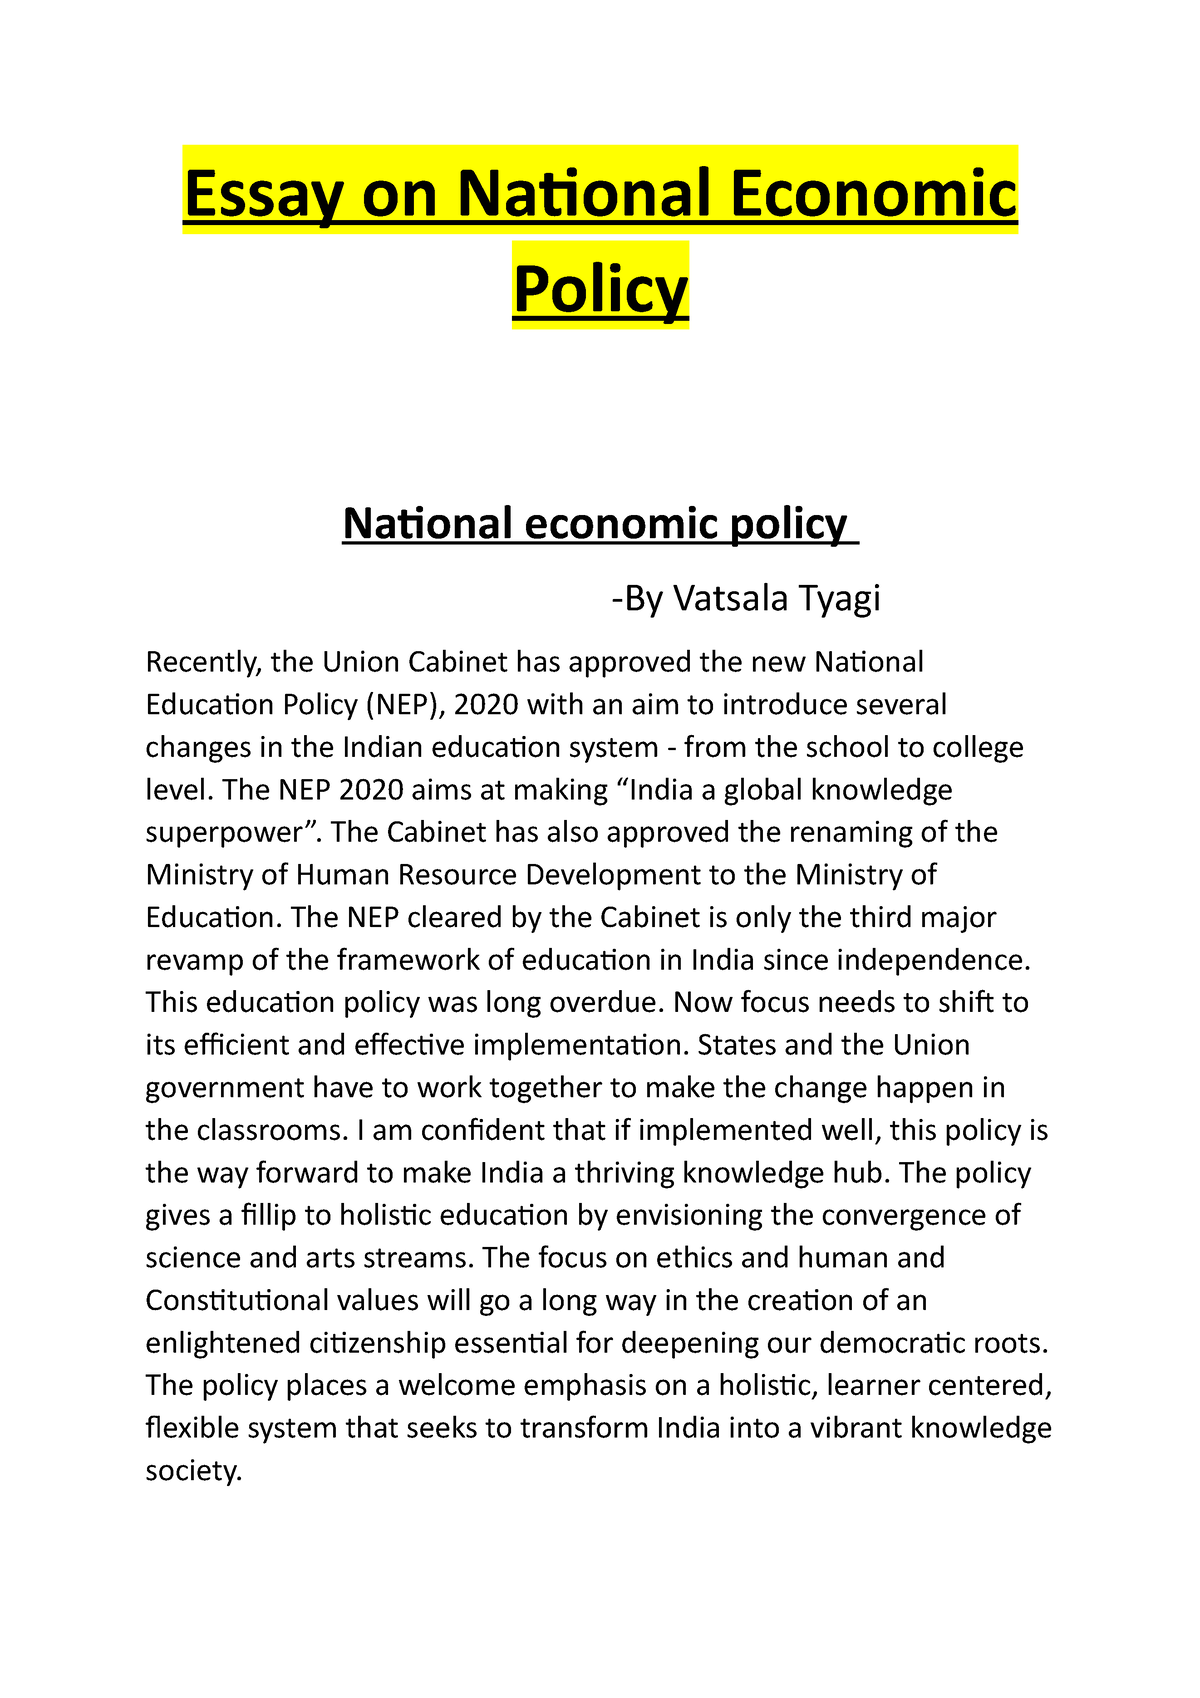 new national education policy essay